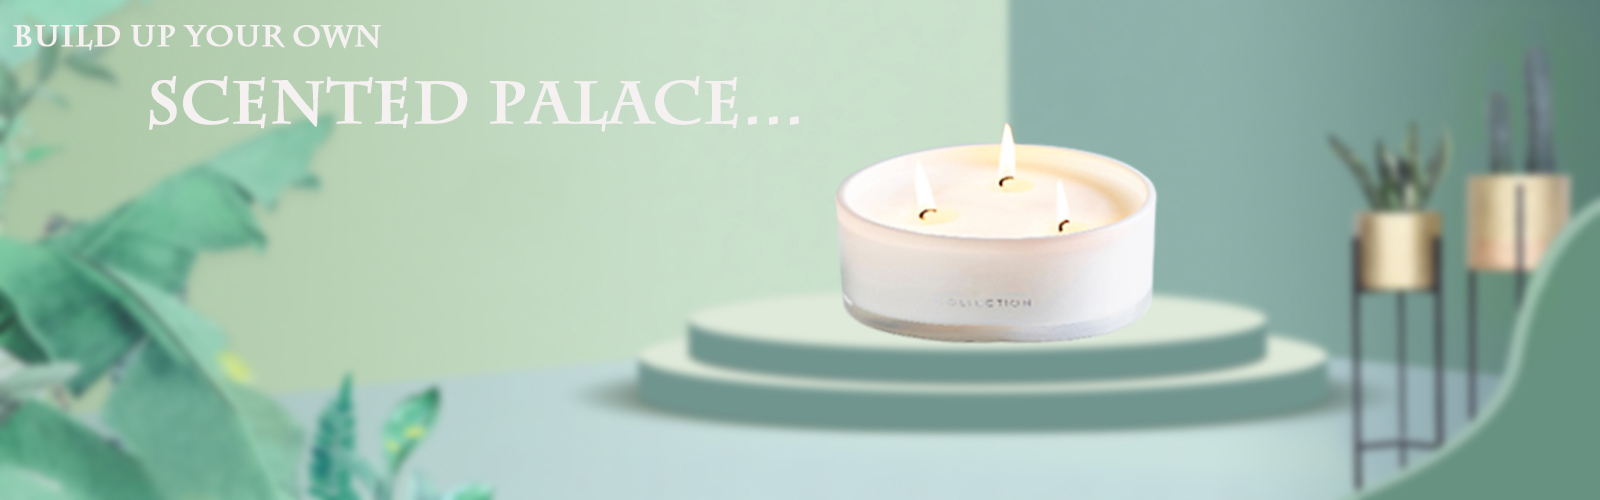 Scented candles manufacturer